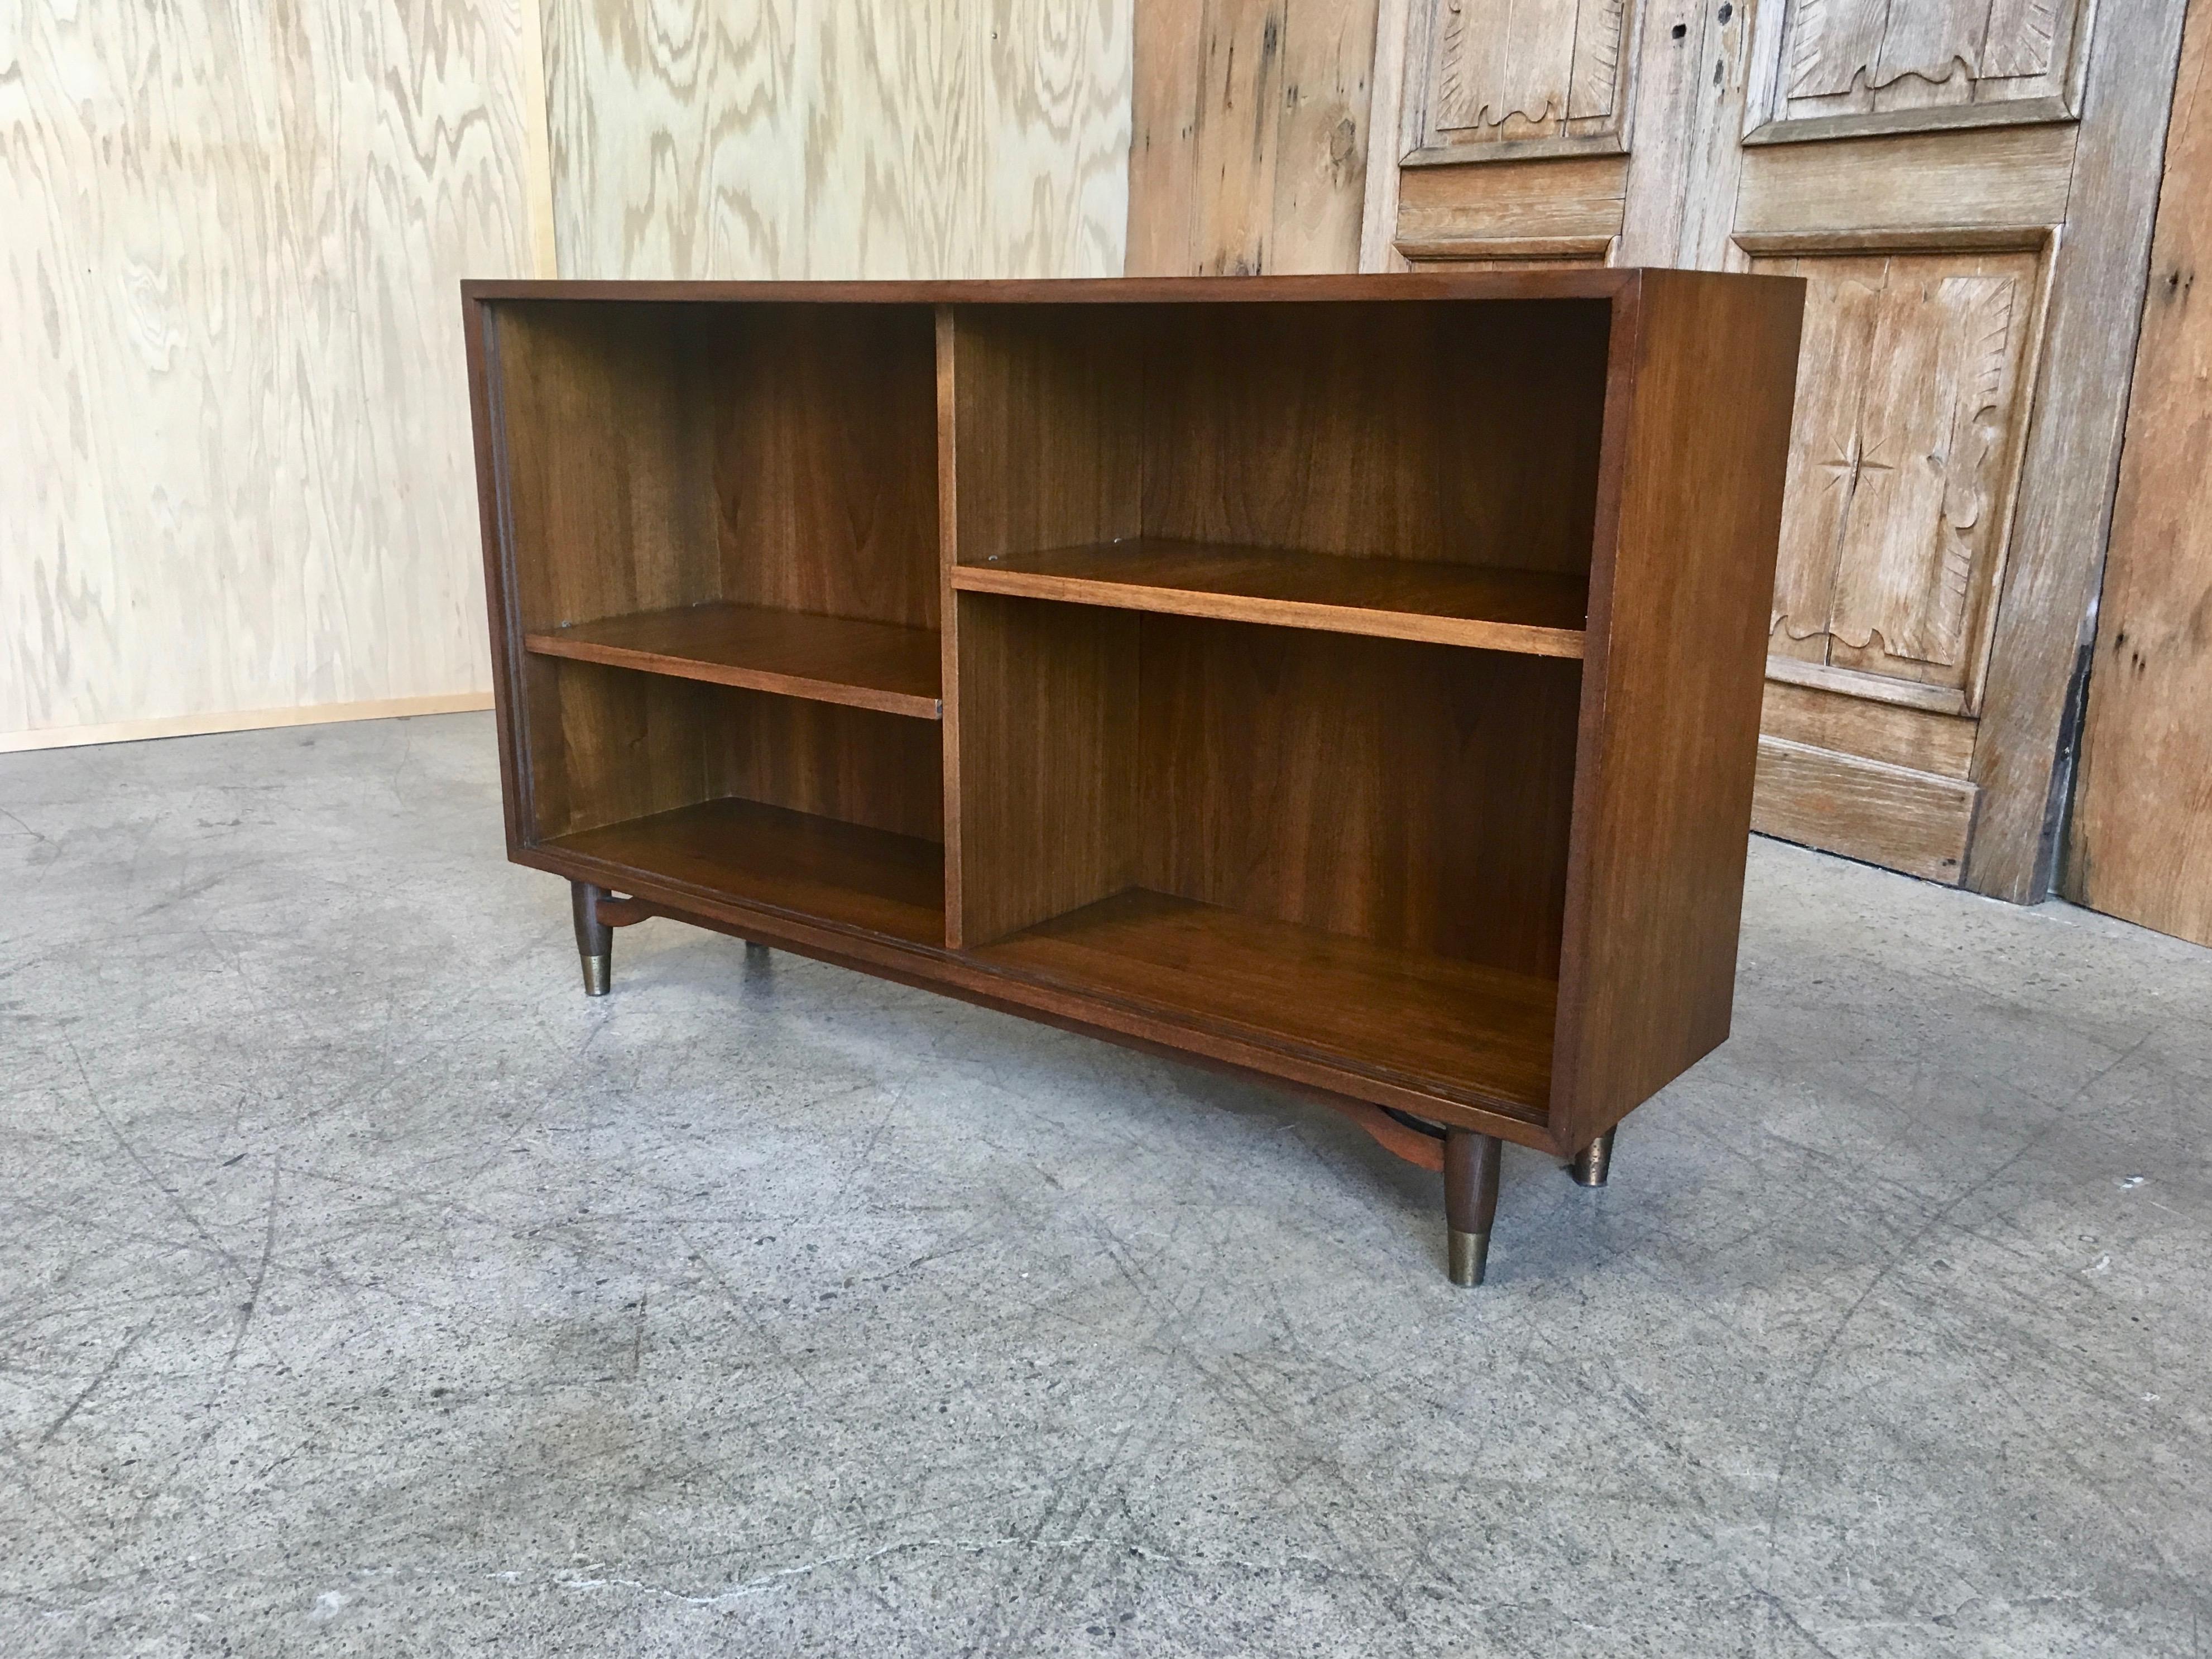 Rare Barzilay bookcase or China cabinet with sliding glass doors.